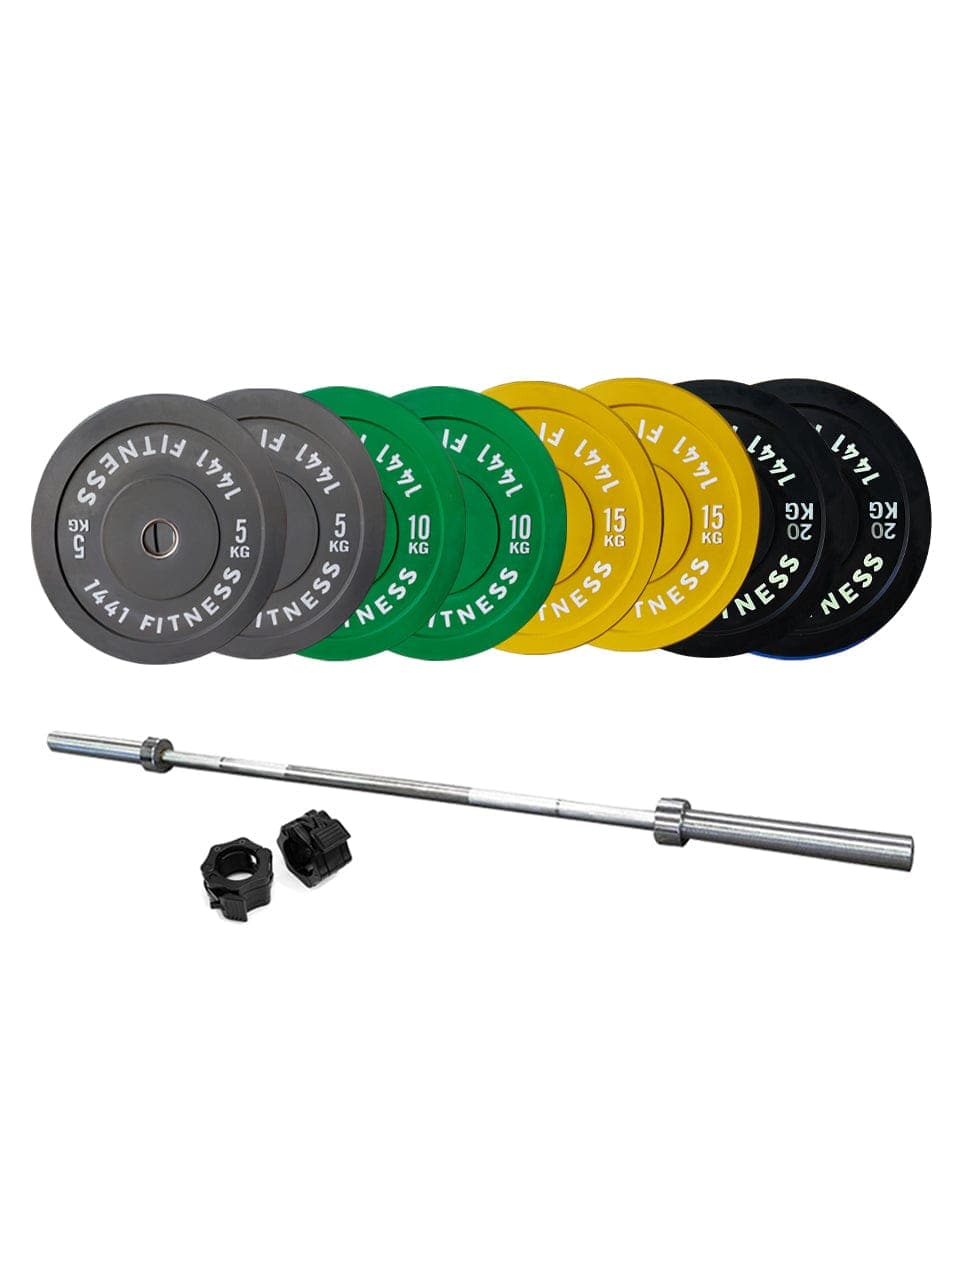 PRSAE Plates & Bars 7 Ft Olympic Barbell and Color Bumper Plate Set - 120 Kg 1441 Fitness